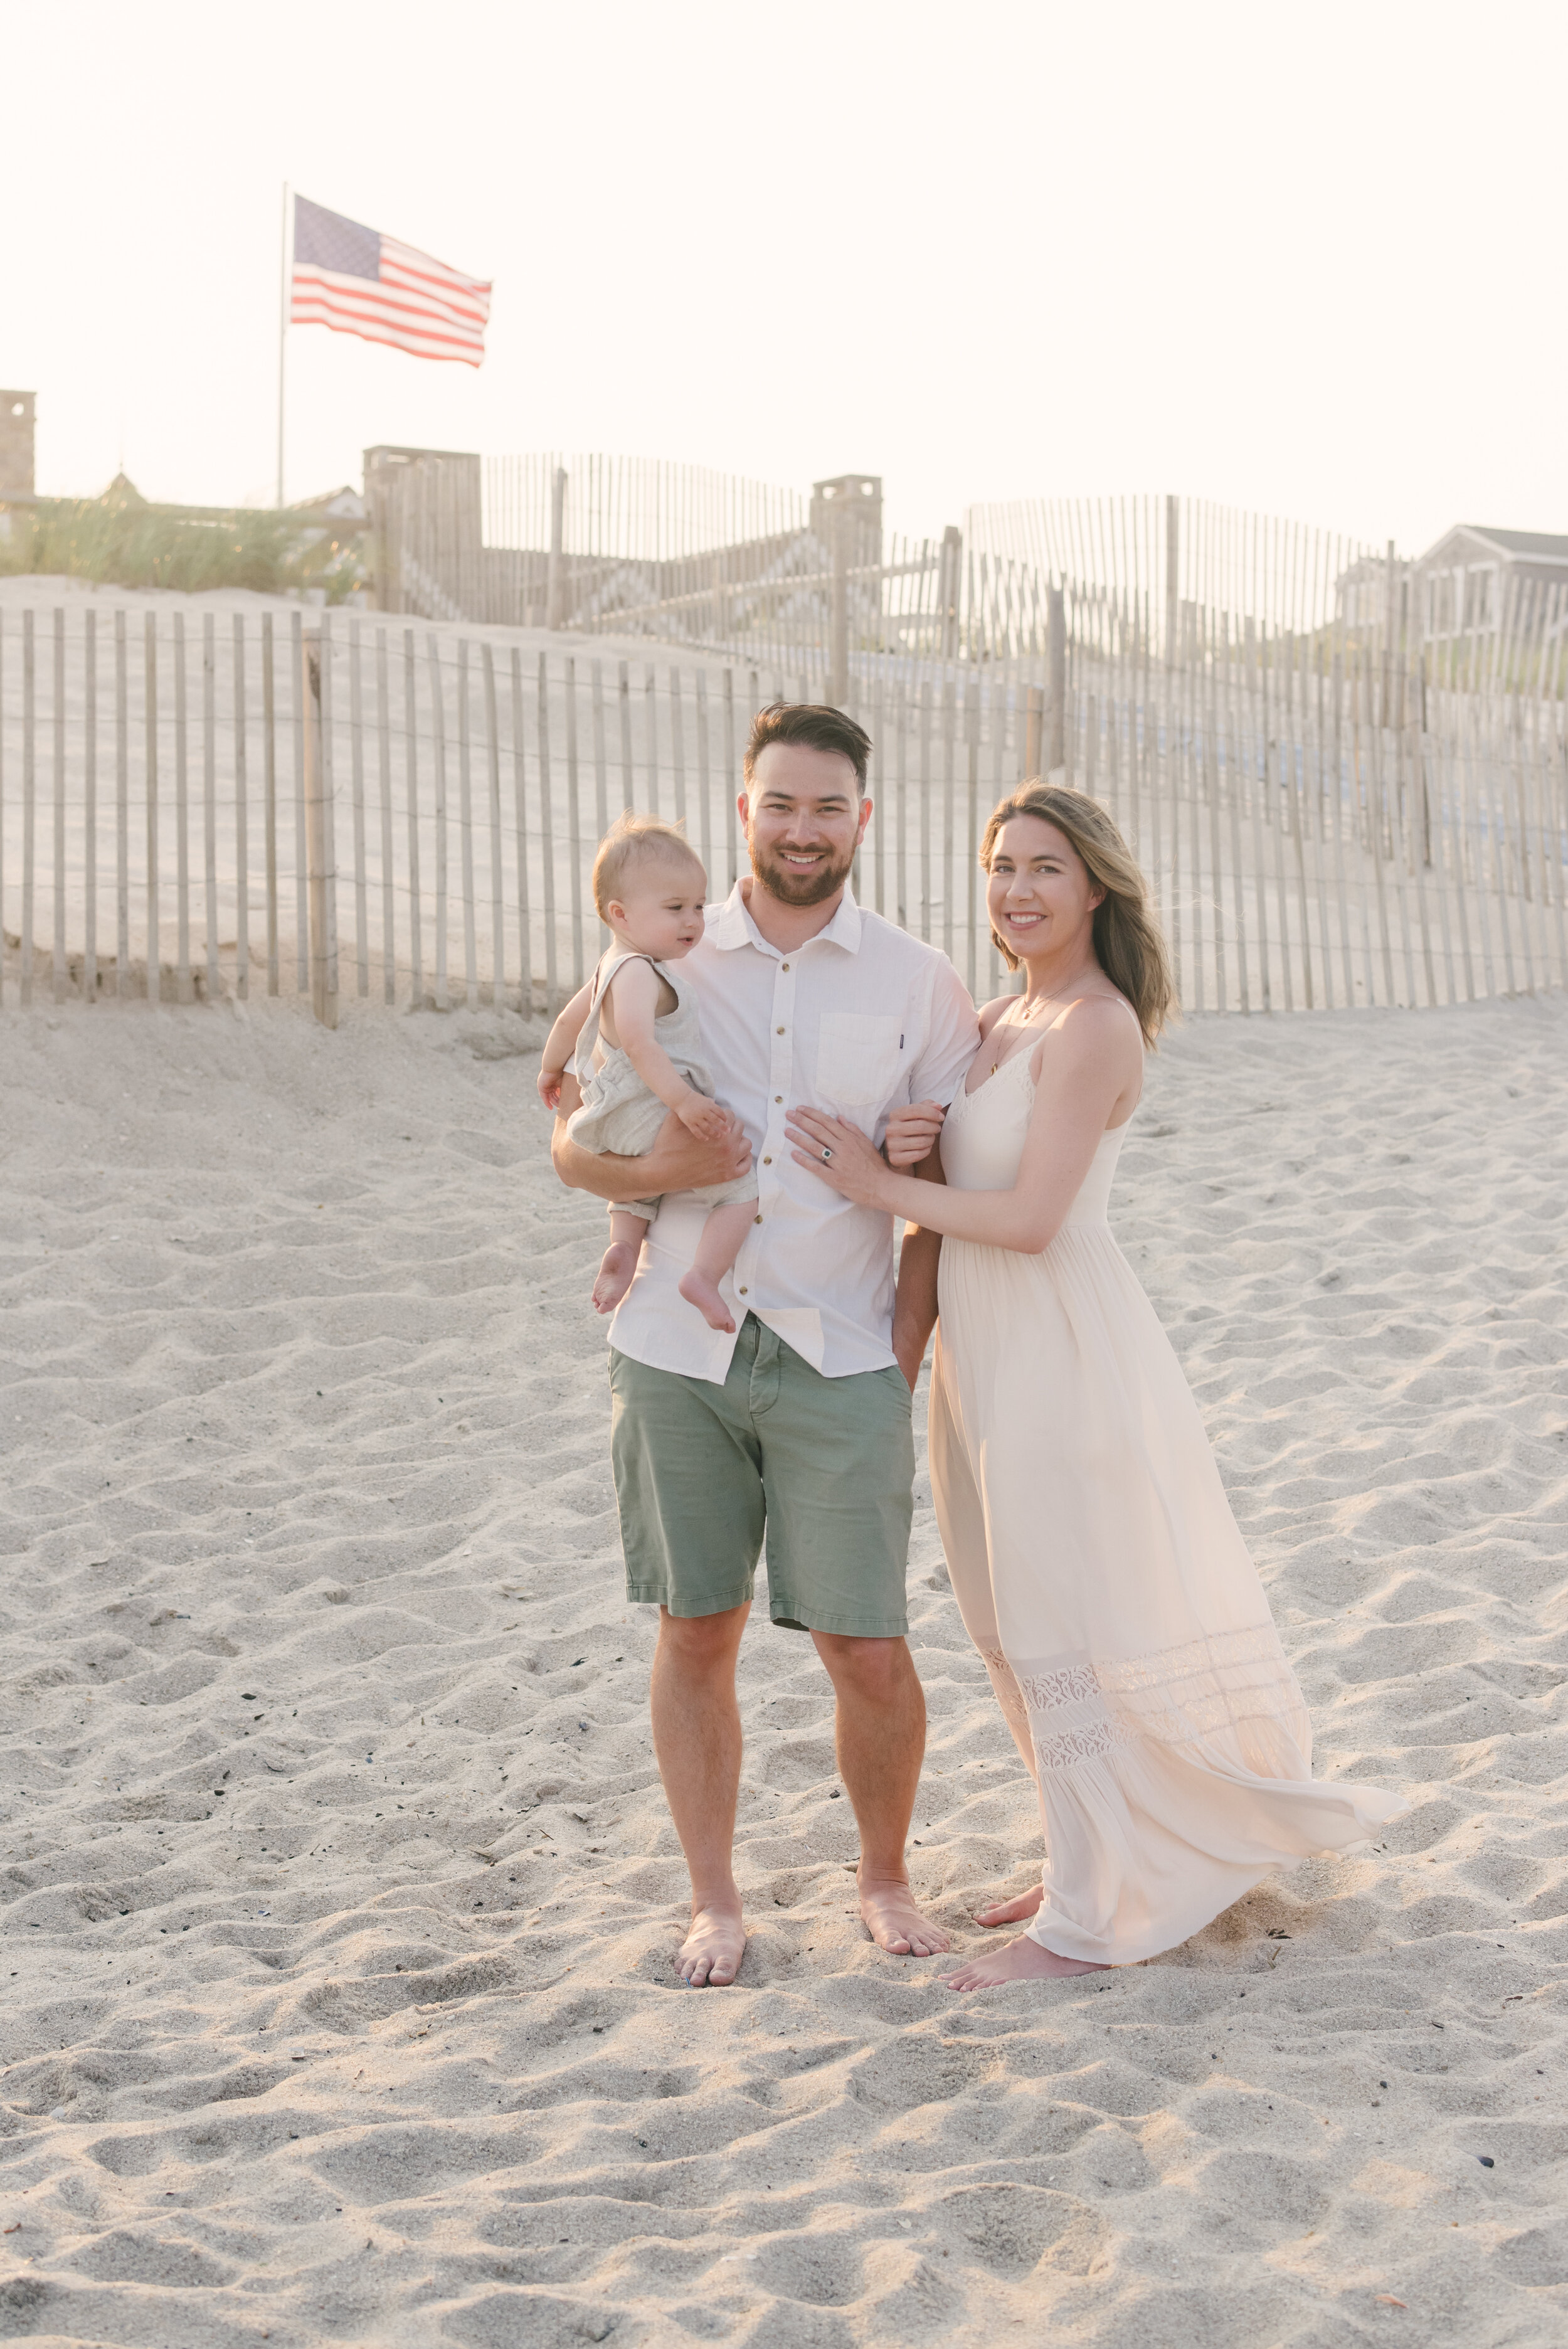 Mom, dad, and baby standing on beach during family photos | NKB Photo